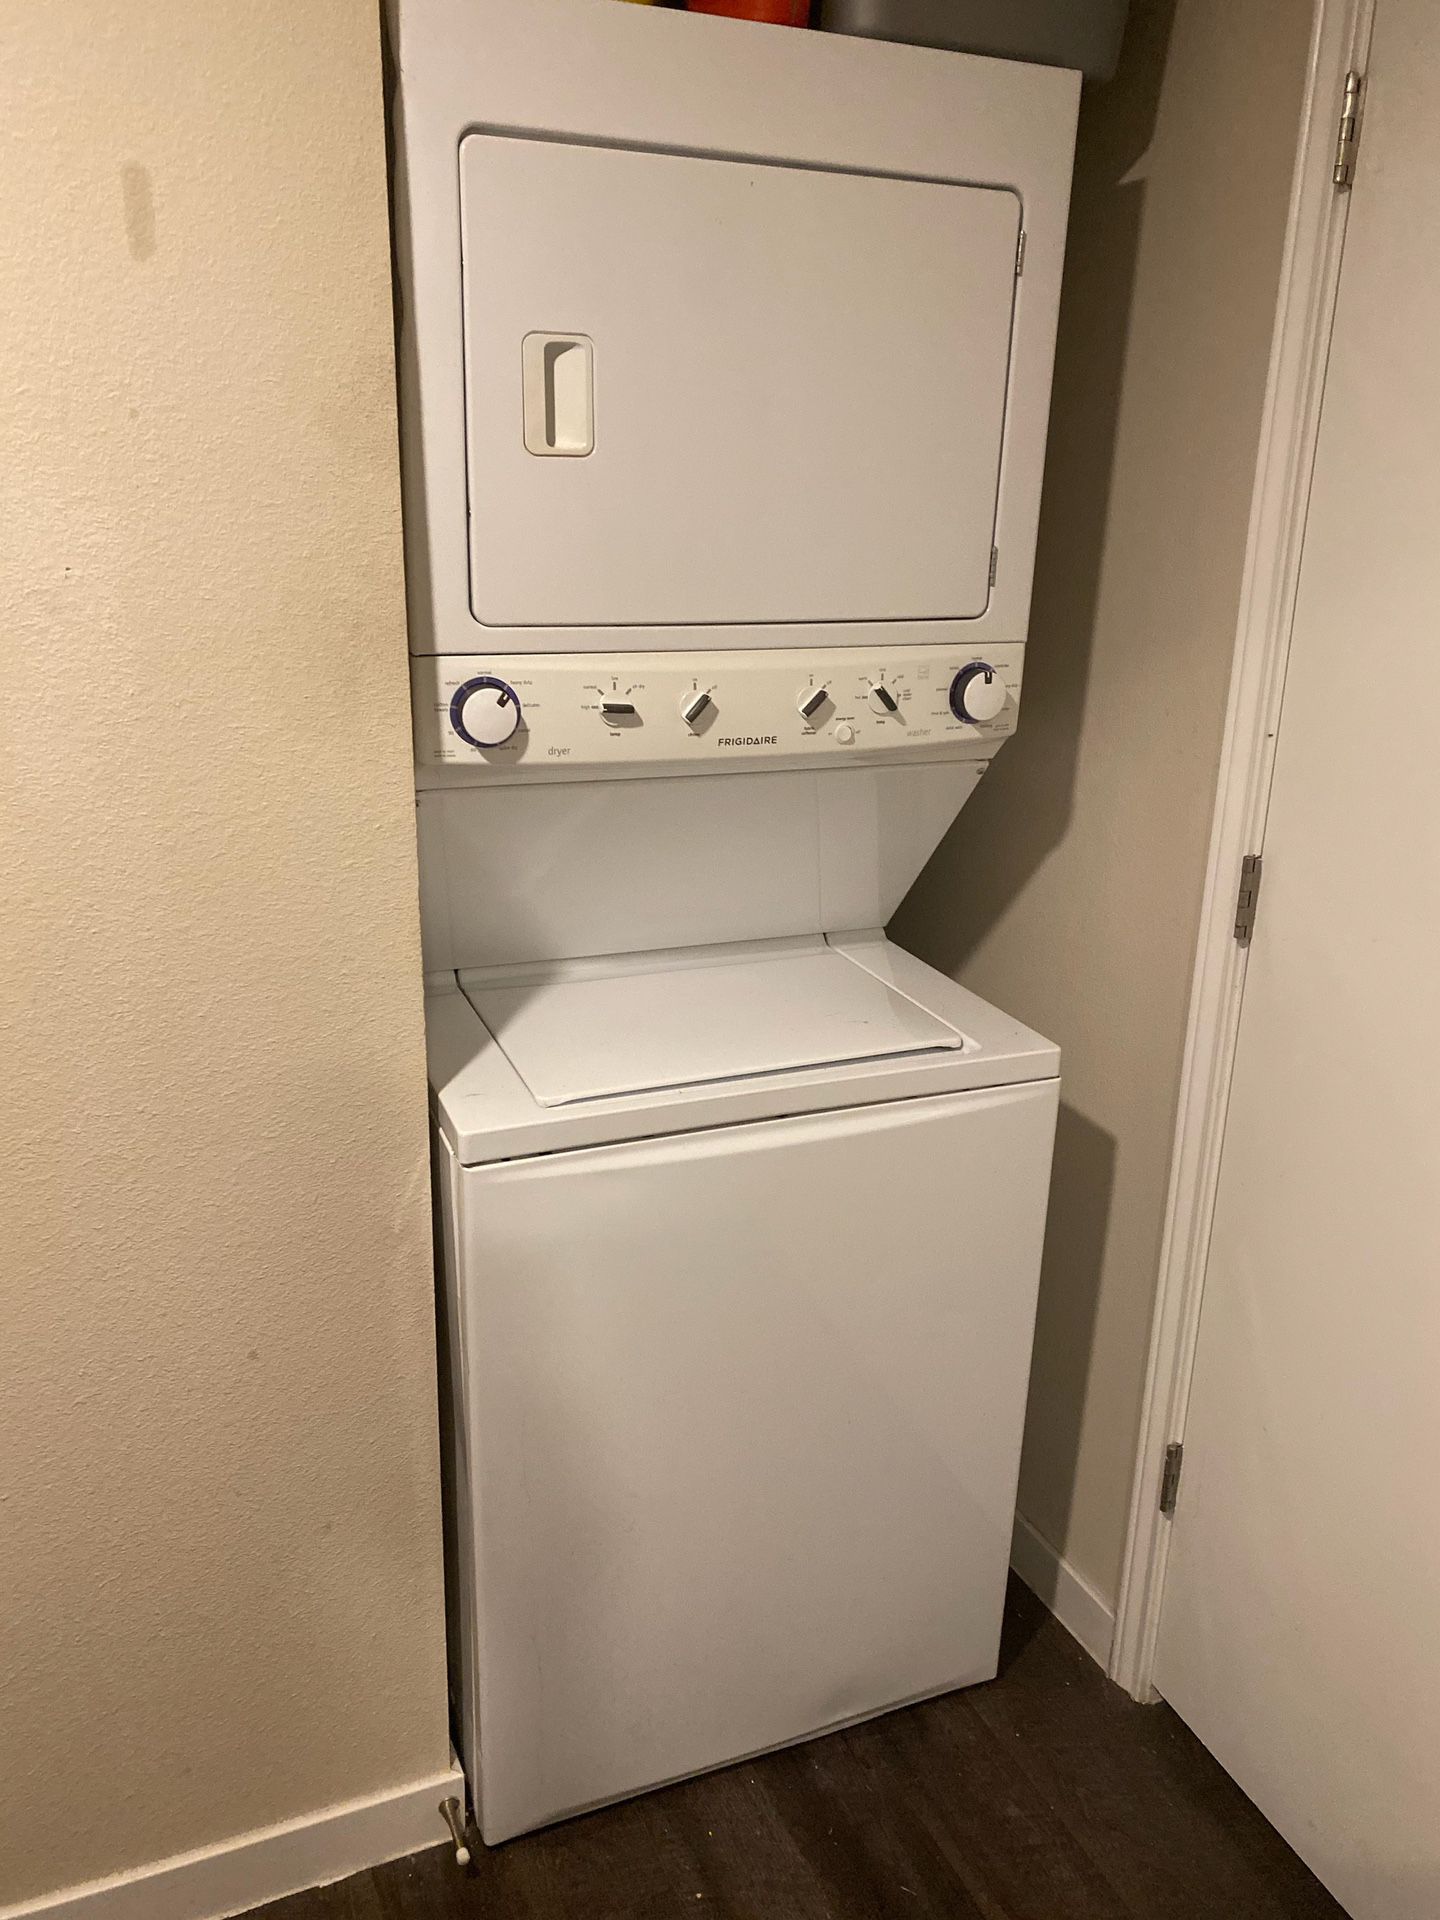 frigidaire stackable washer and dryer $200